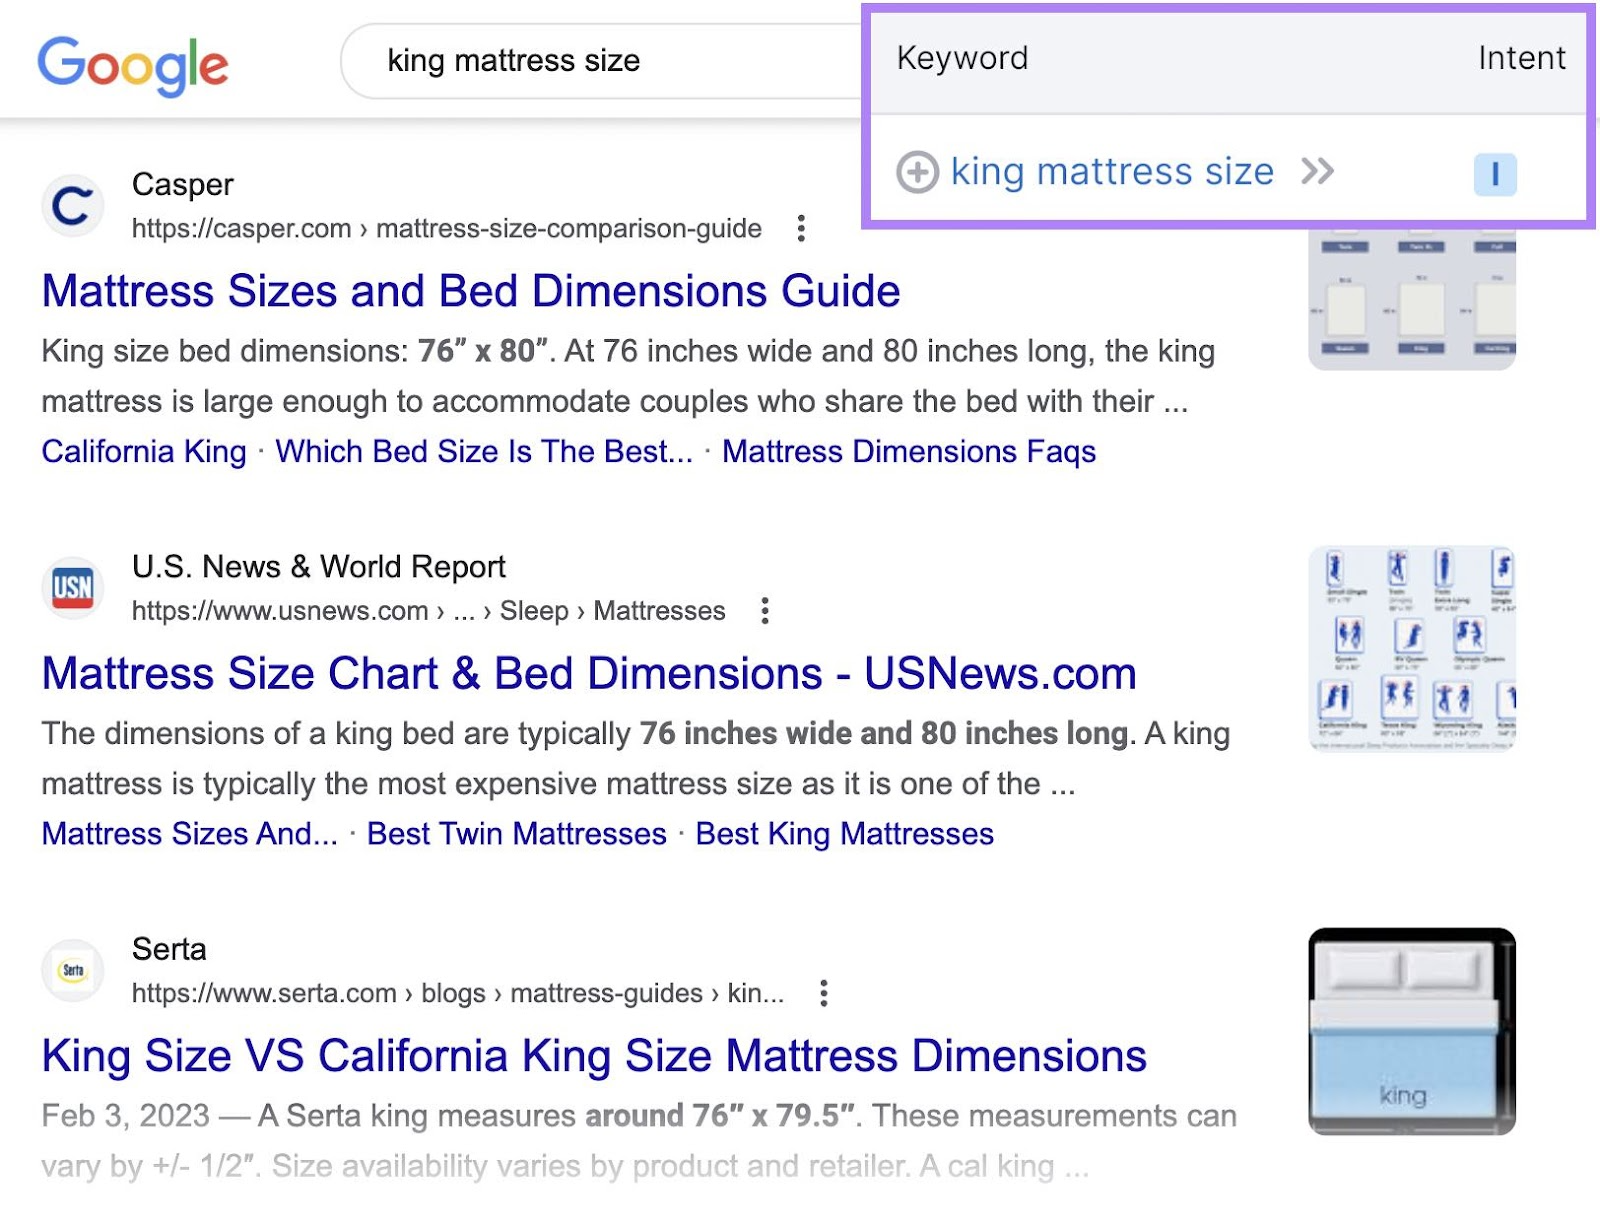 Google results for “king mattress size” search